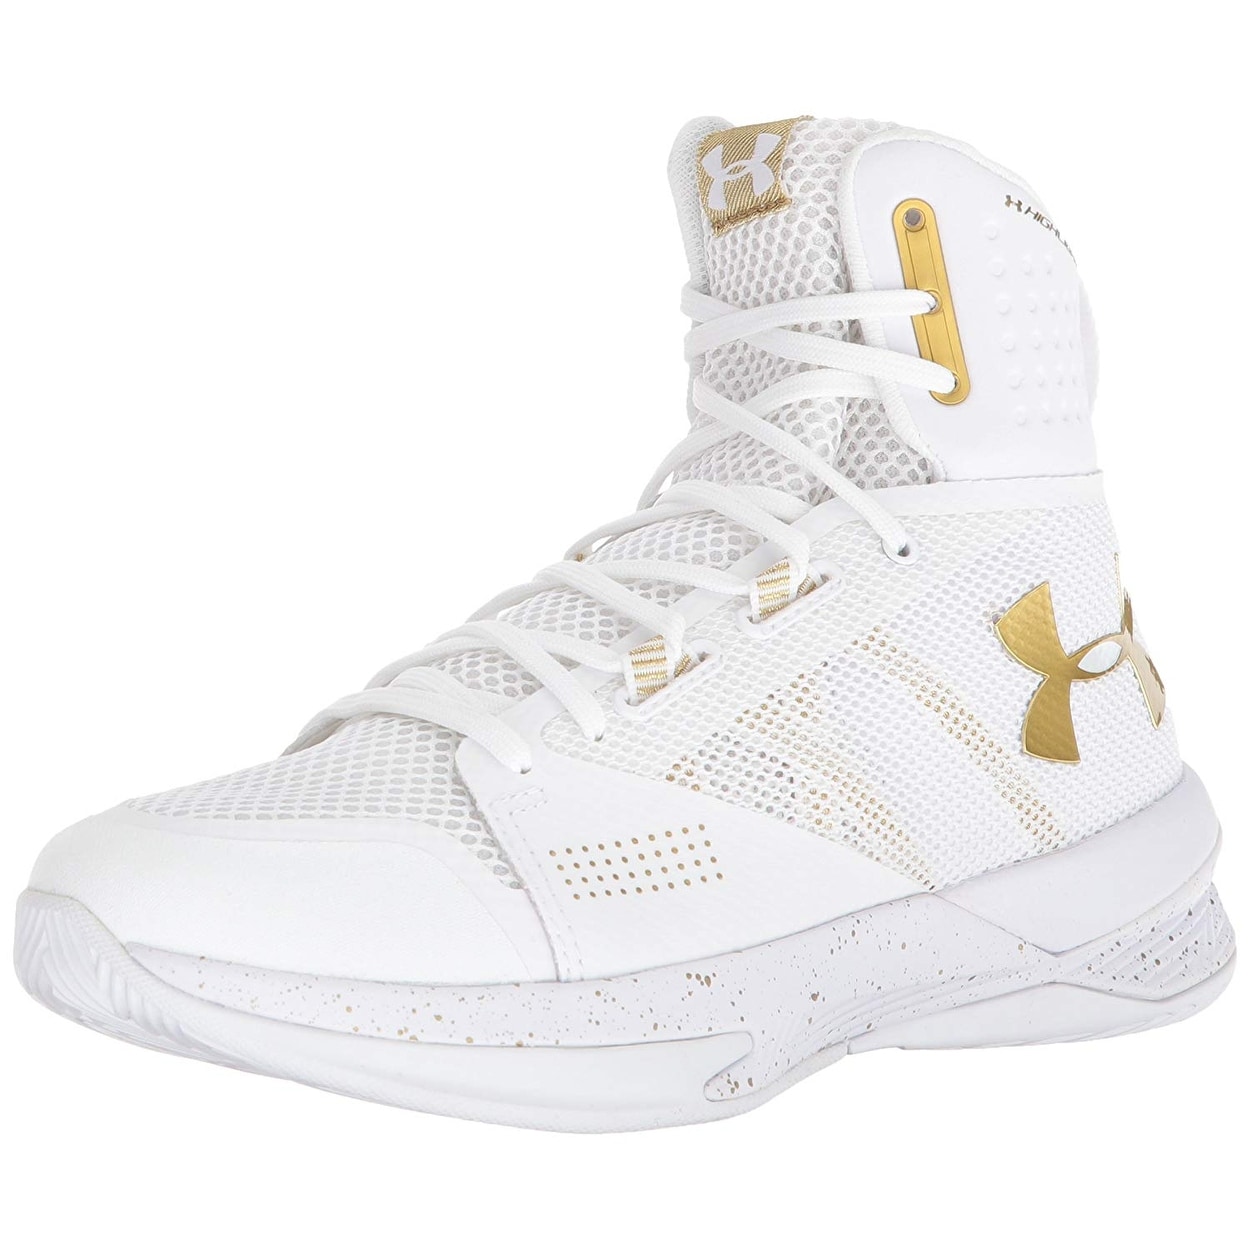 white high top under armour volleyball shoes